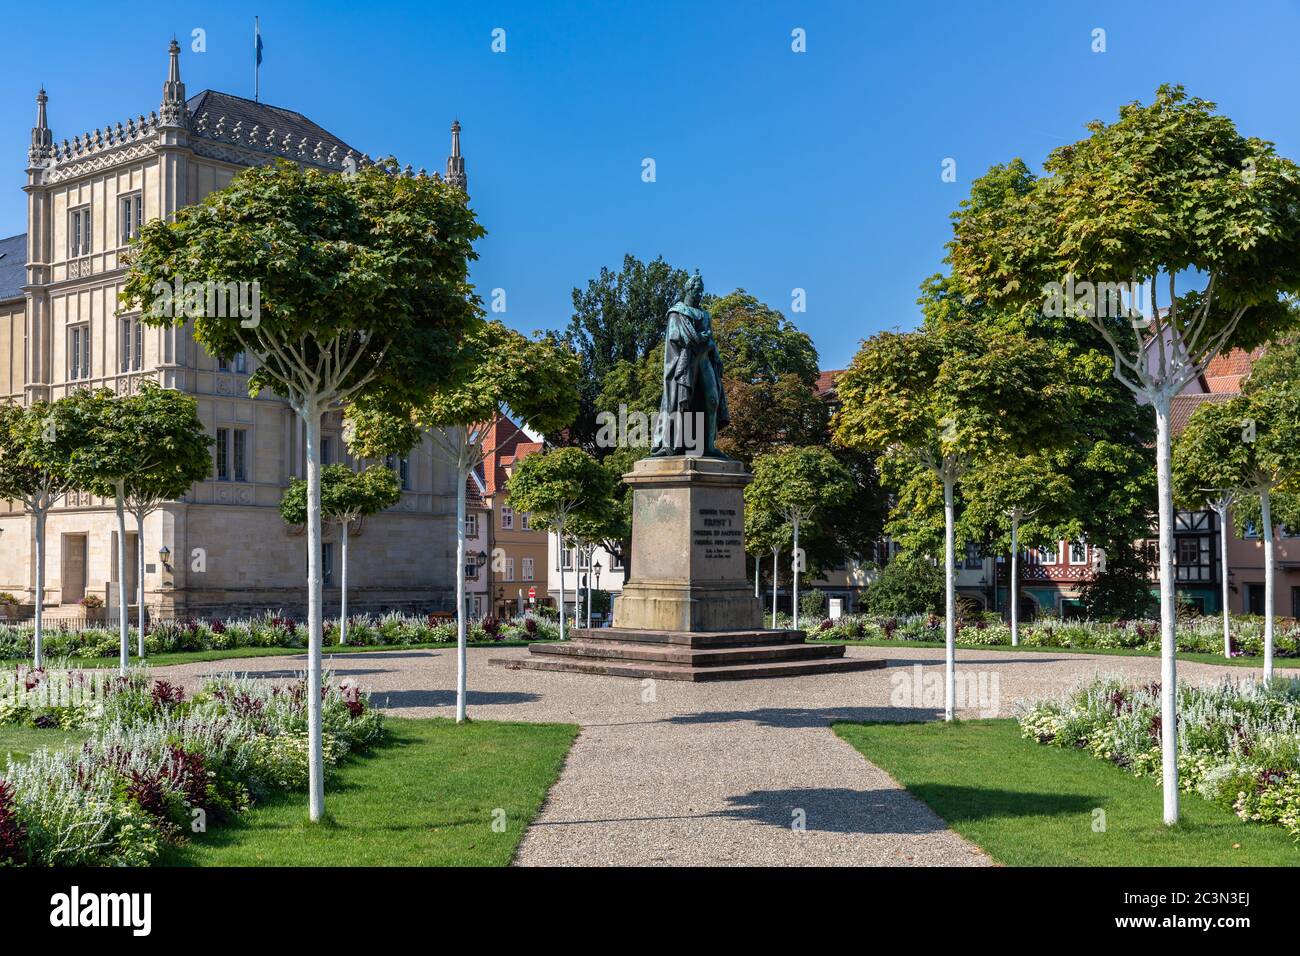 Viee of the statue of Herzog Ernst I in front of Ehrenburg Palace on a sunny summer day, in Coburg, Bavaria, Germany Stock Photo